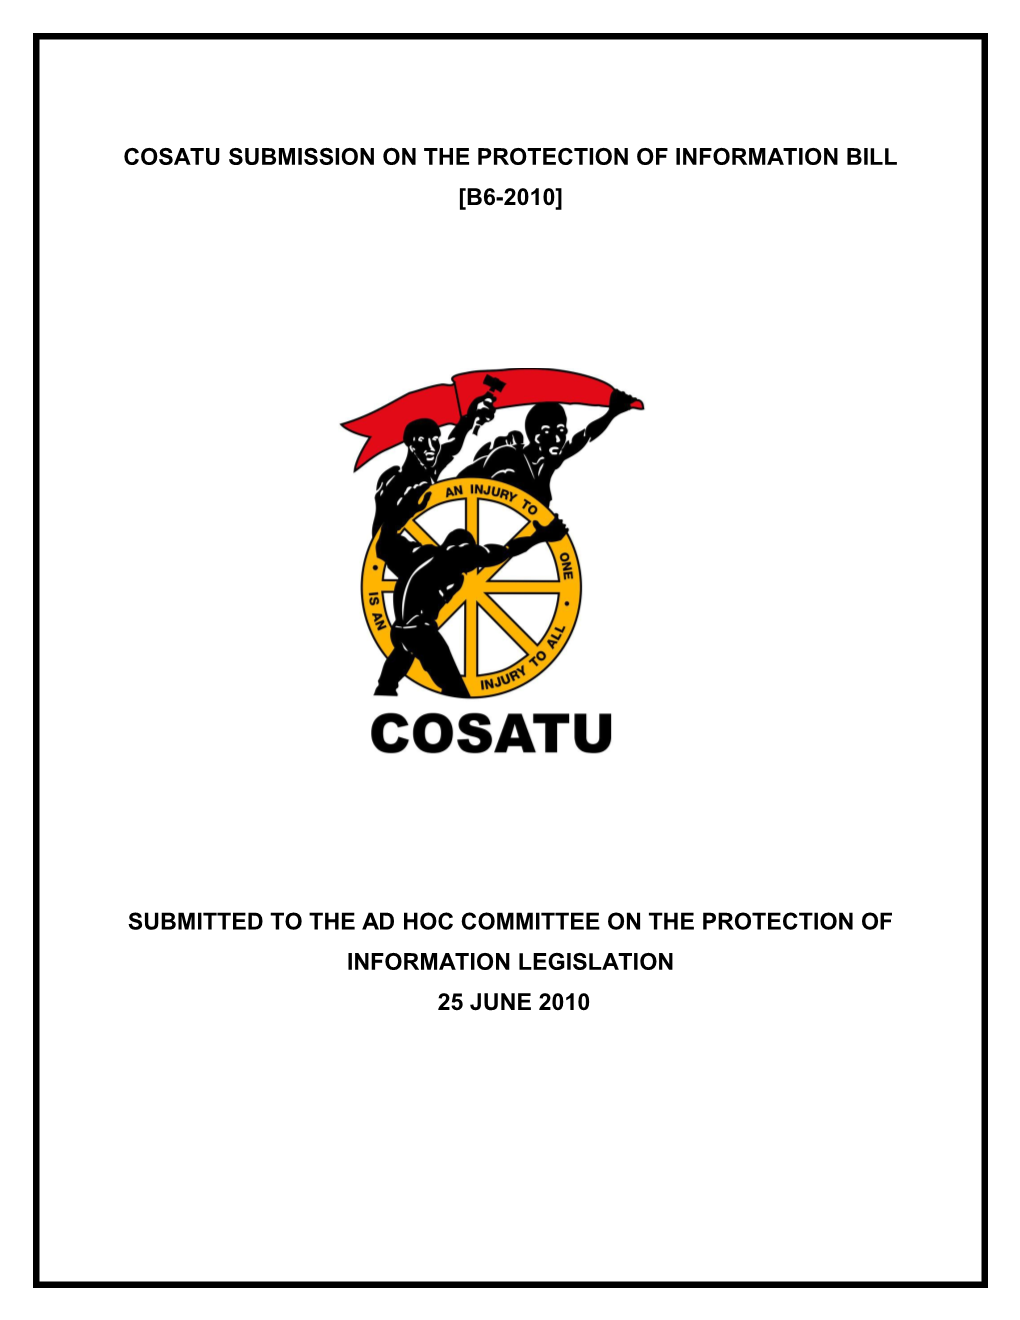 Cosatu Submission on the South African Postbank Bill B14 2009